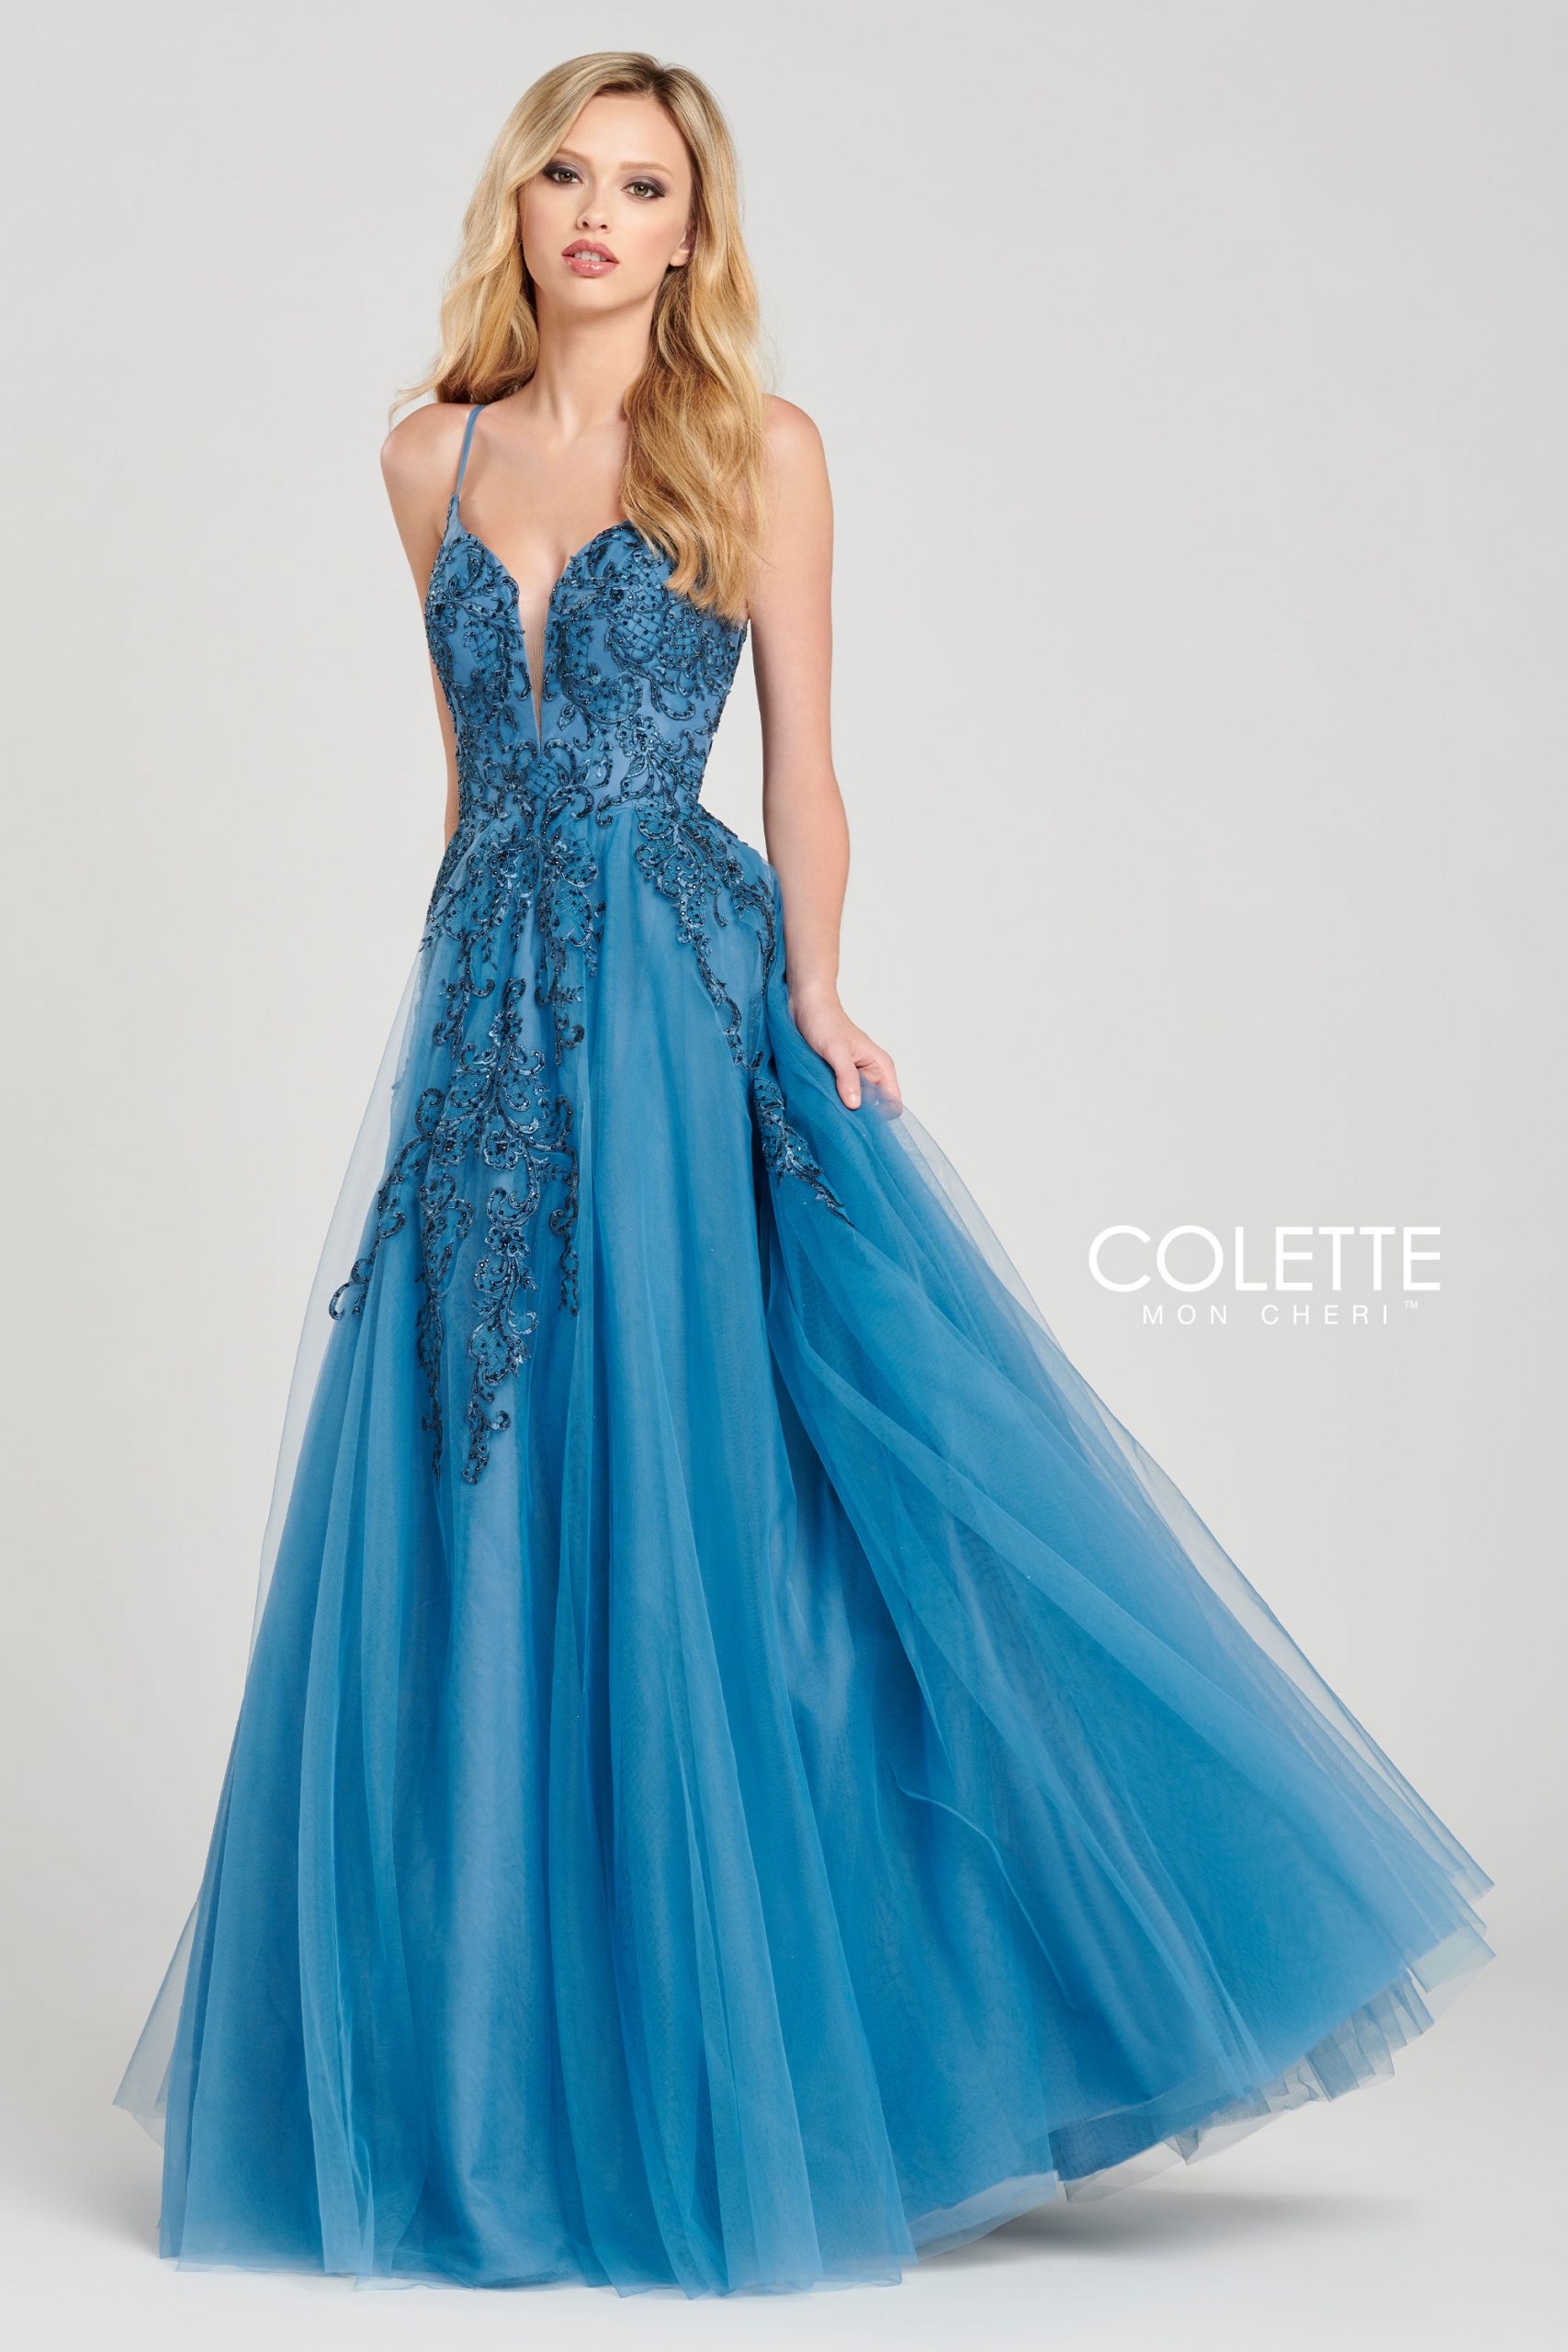 CL12042 - Colette dresses available at Lisa's Bridal